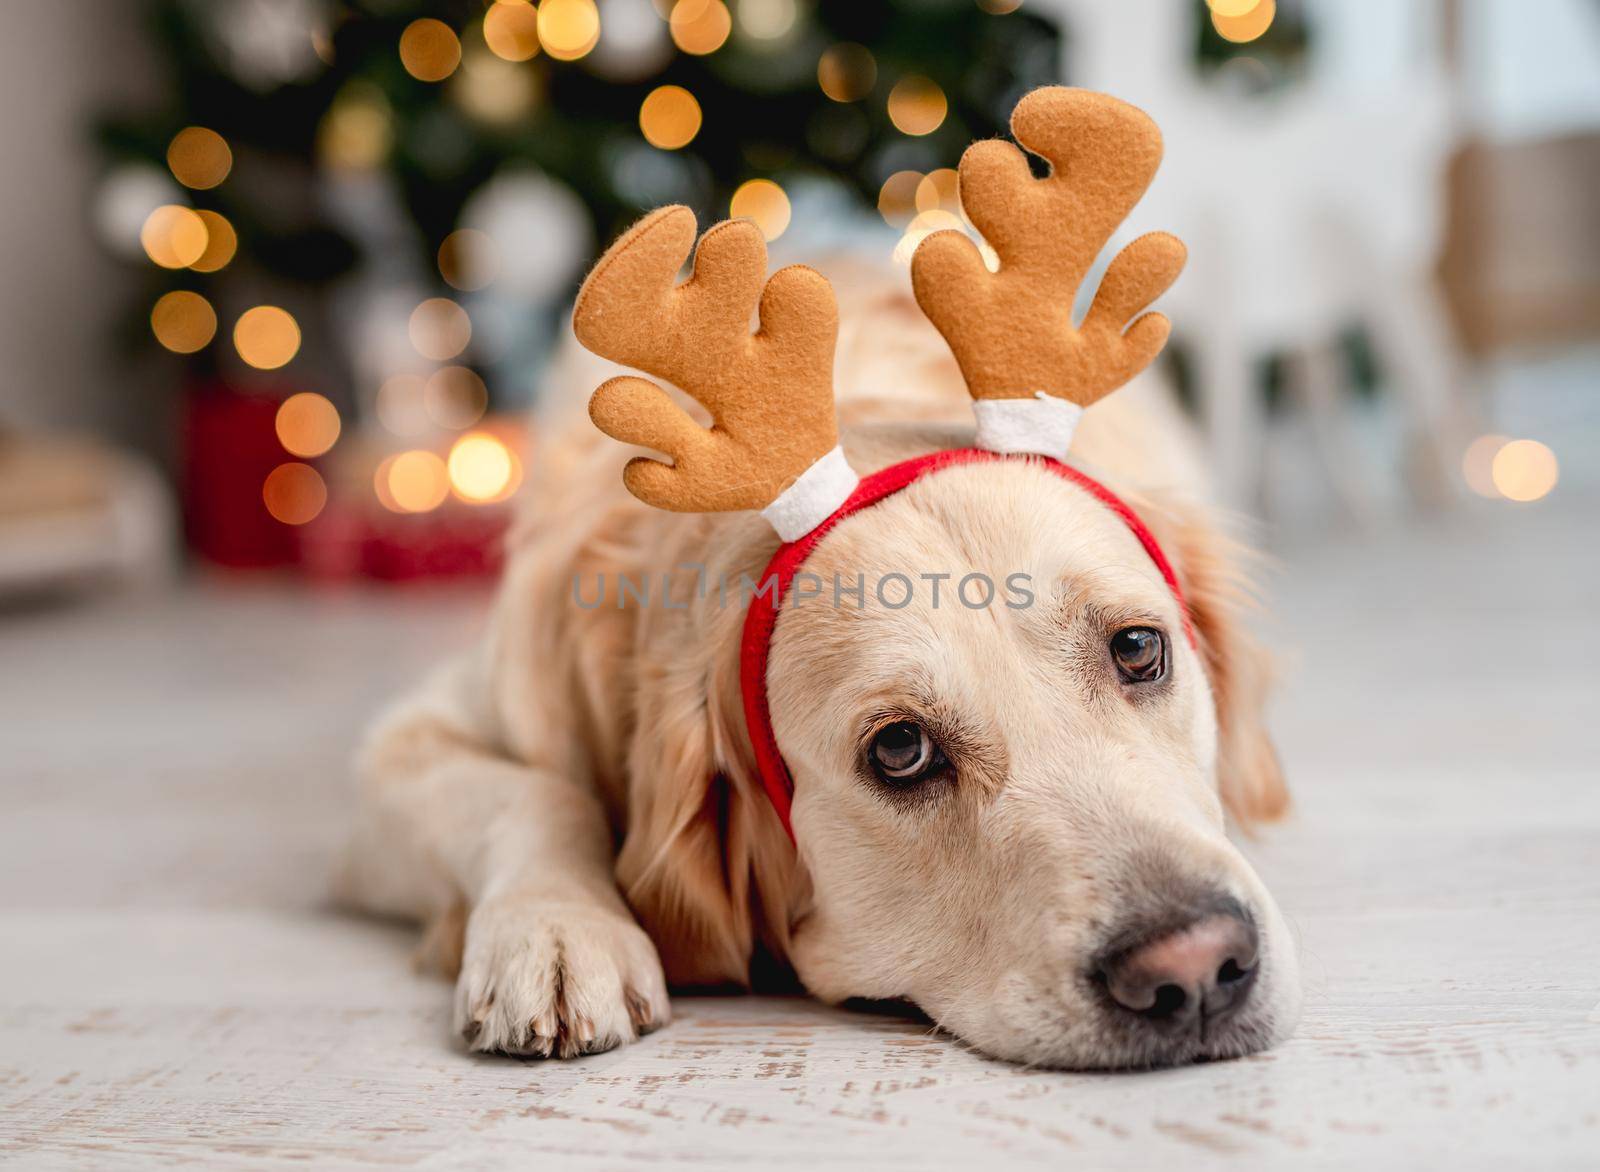 Golden retriever dog wearing festive costume lying in decorated room on the floor in Christmas time